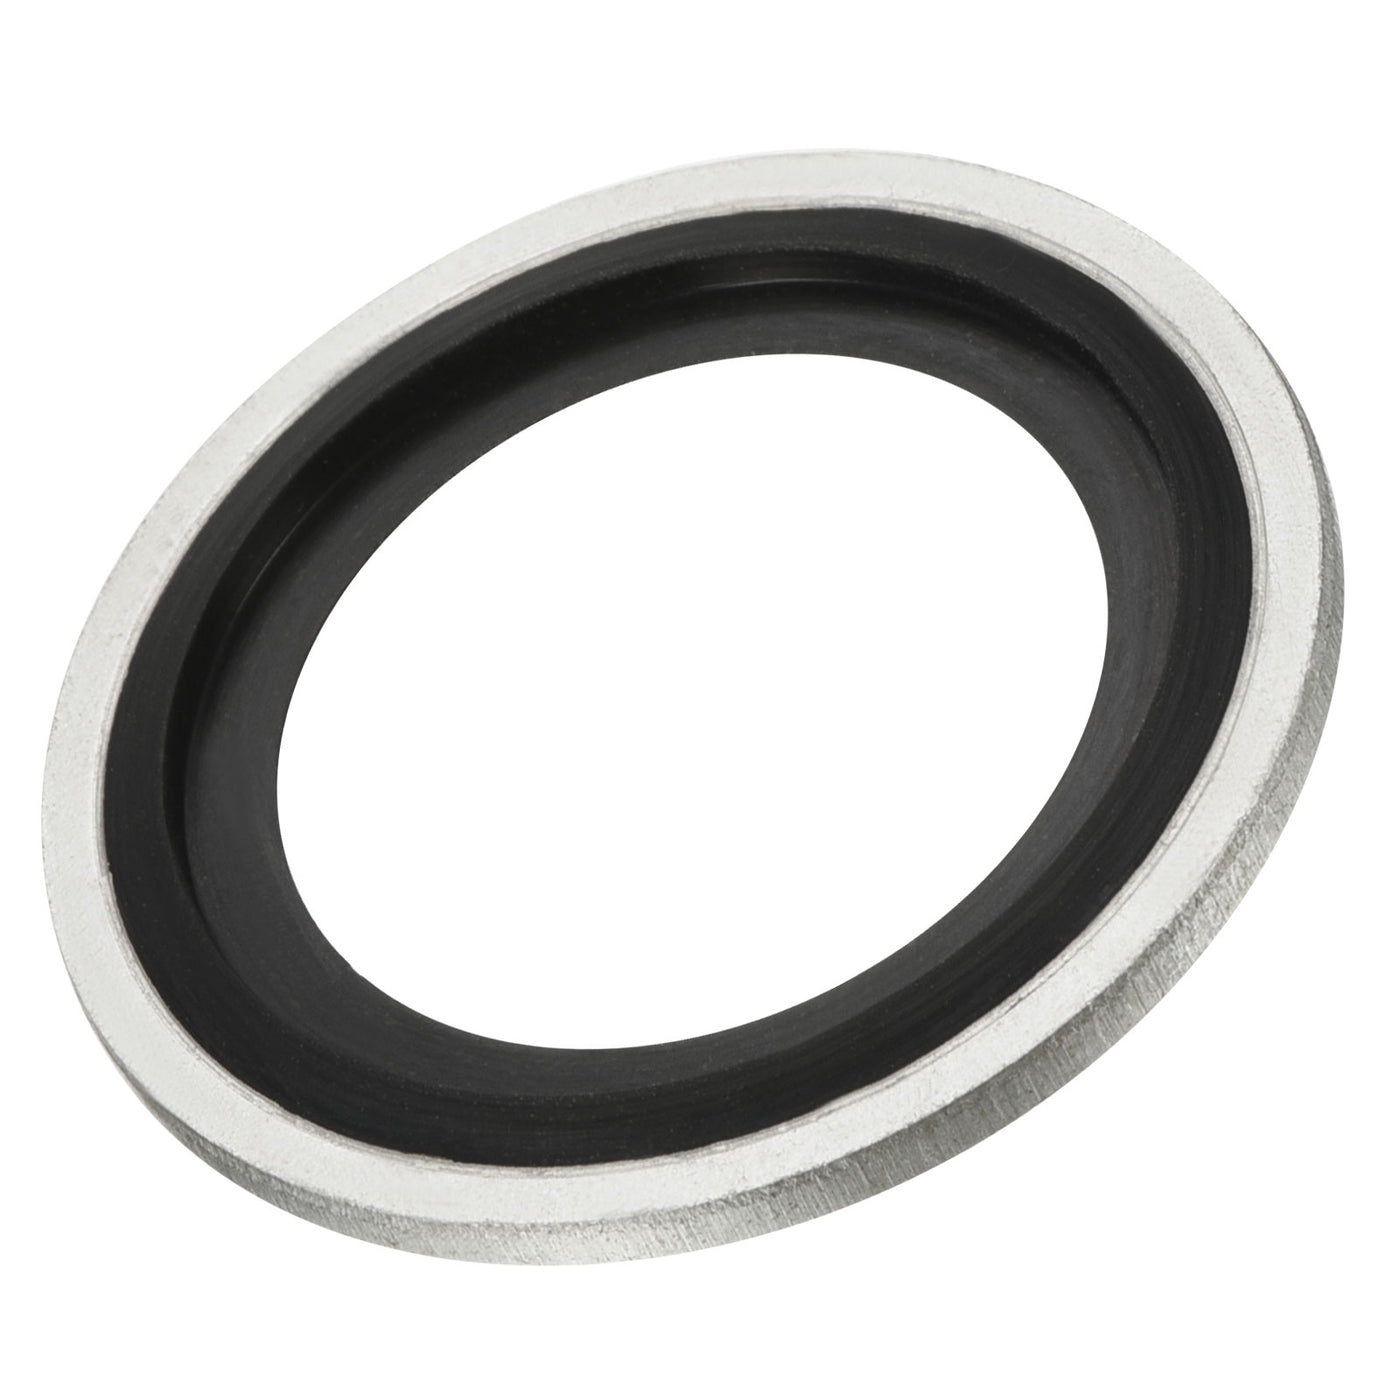 Harfington Bonded Sealing Washers M24 31.8x24.7x2mm Carbon Steel Nitrile Rubber Gasket, Pack of 12